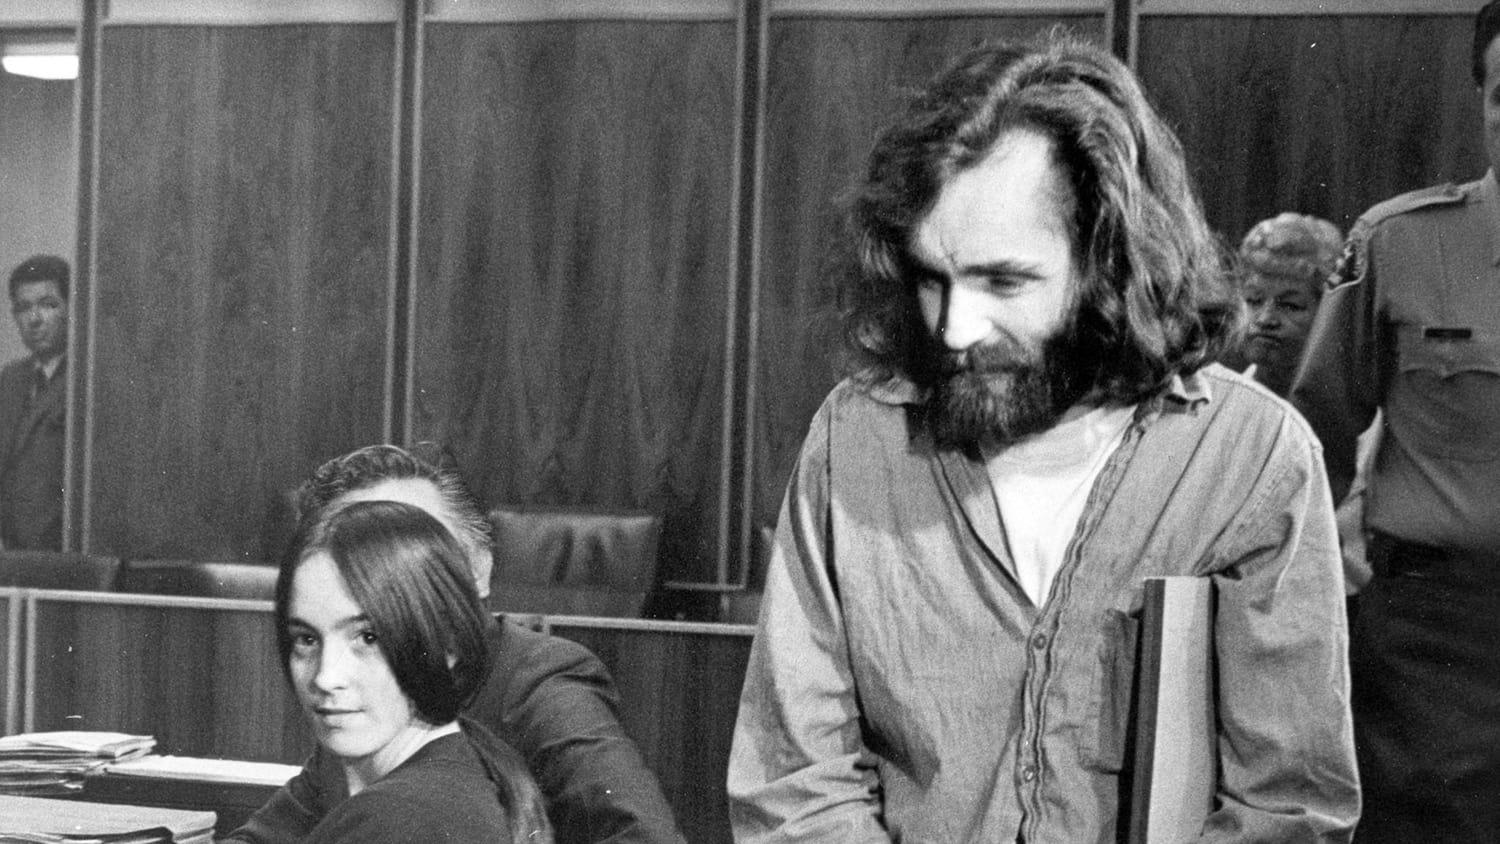 Charles Manson: The Final Words backdrop